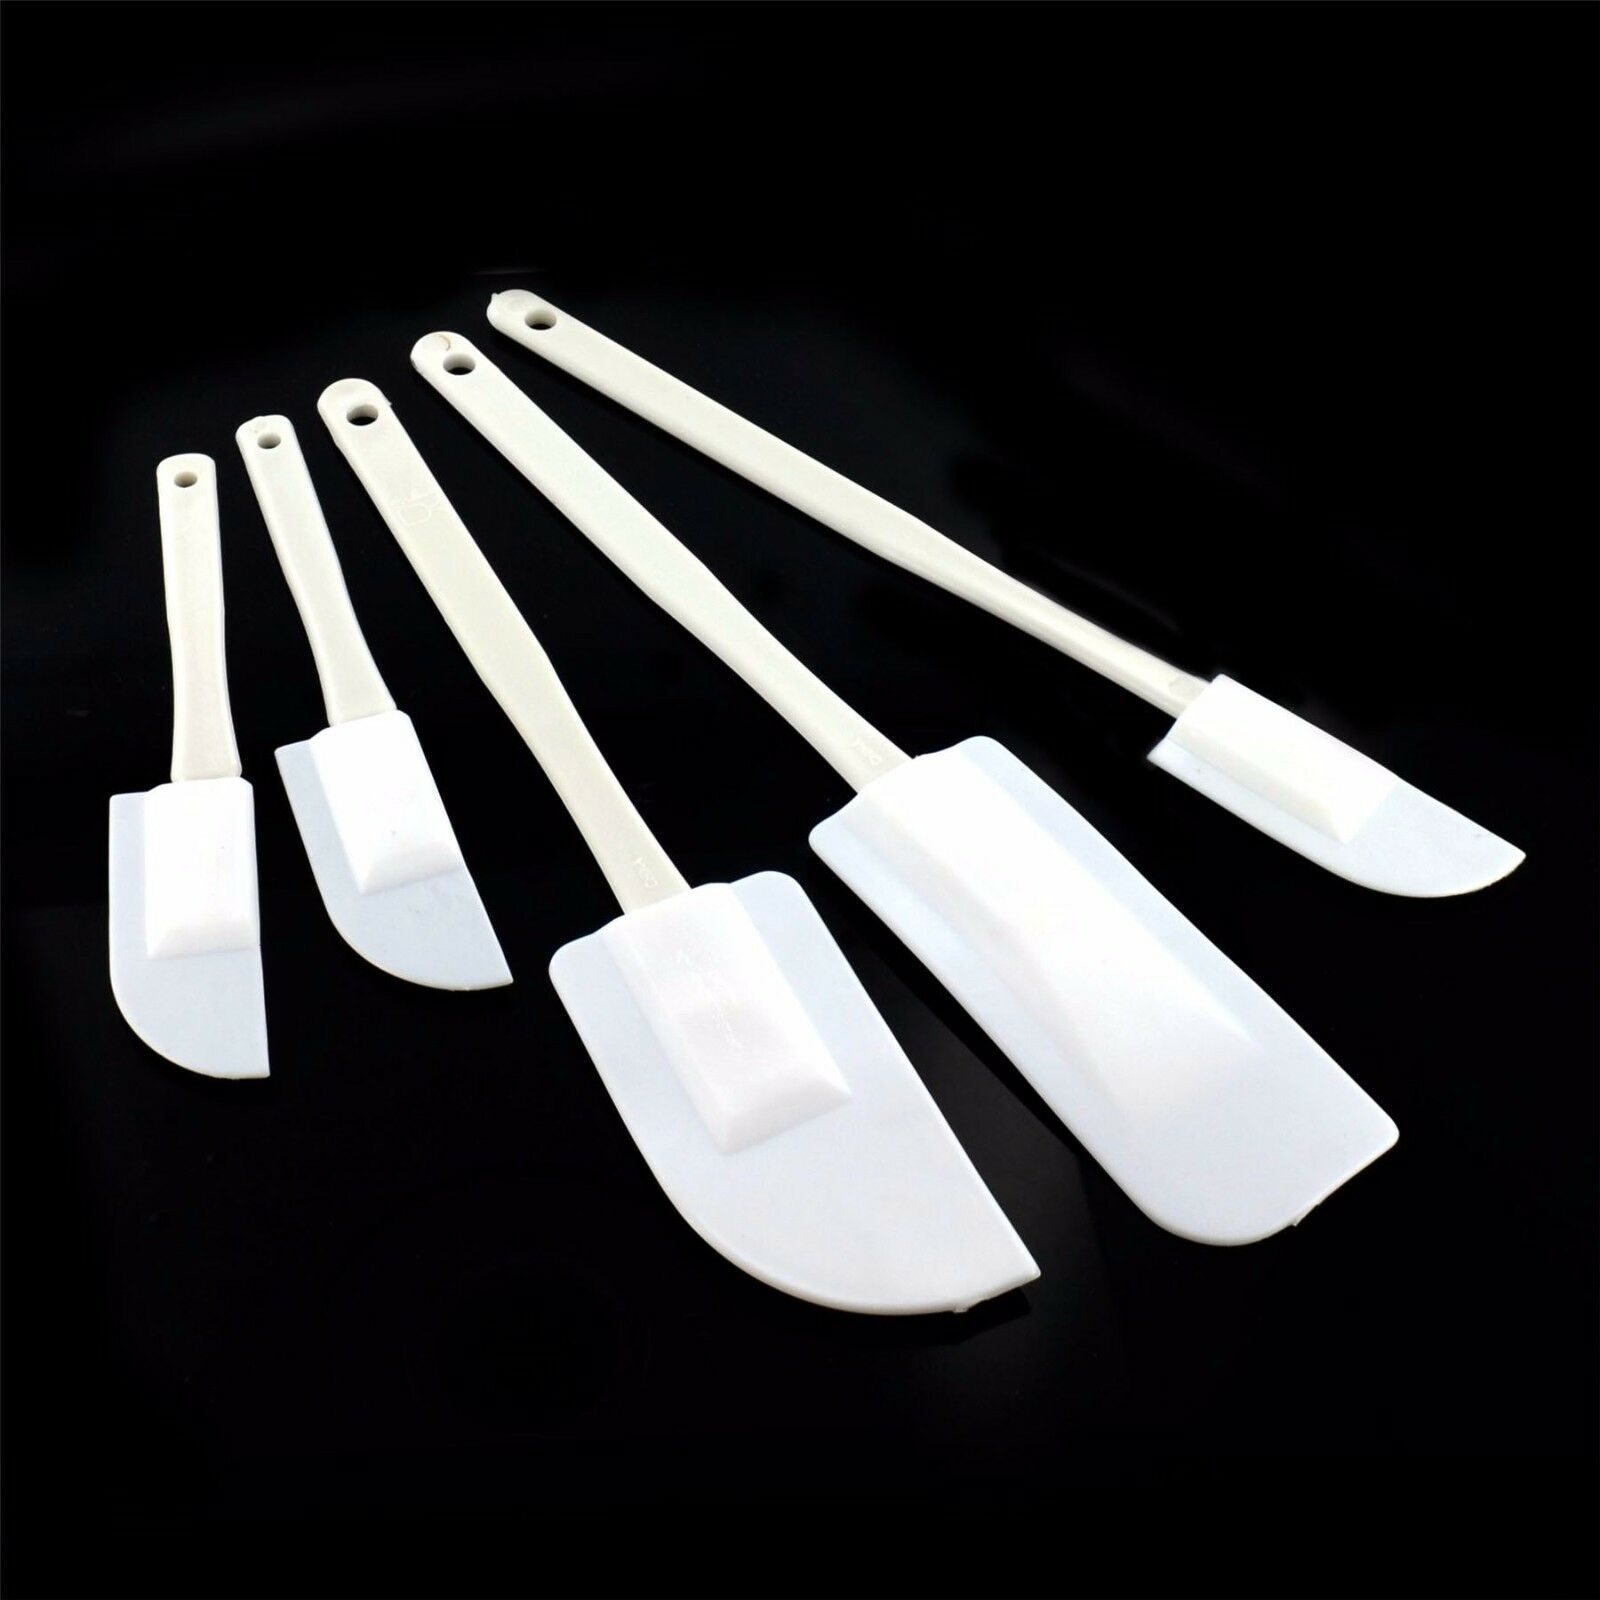 attachment-https://www.cupcakeaddicts.co.uk/wp-content/uploads/imported/1/5-Pack-White-Spatulas-Mixing-Plastic-Set-Baking-Kitchen-Utensils-Tools-322529102581.jpg